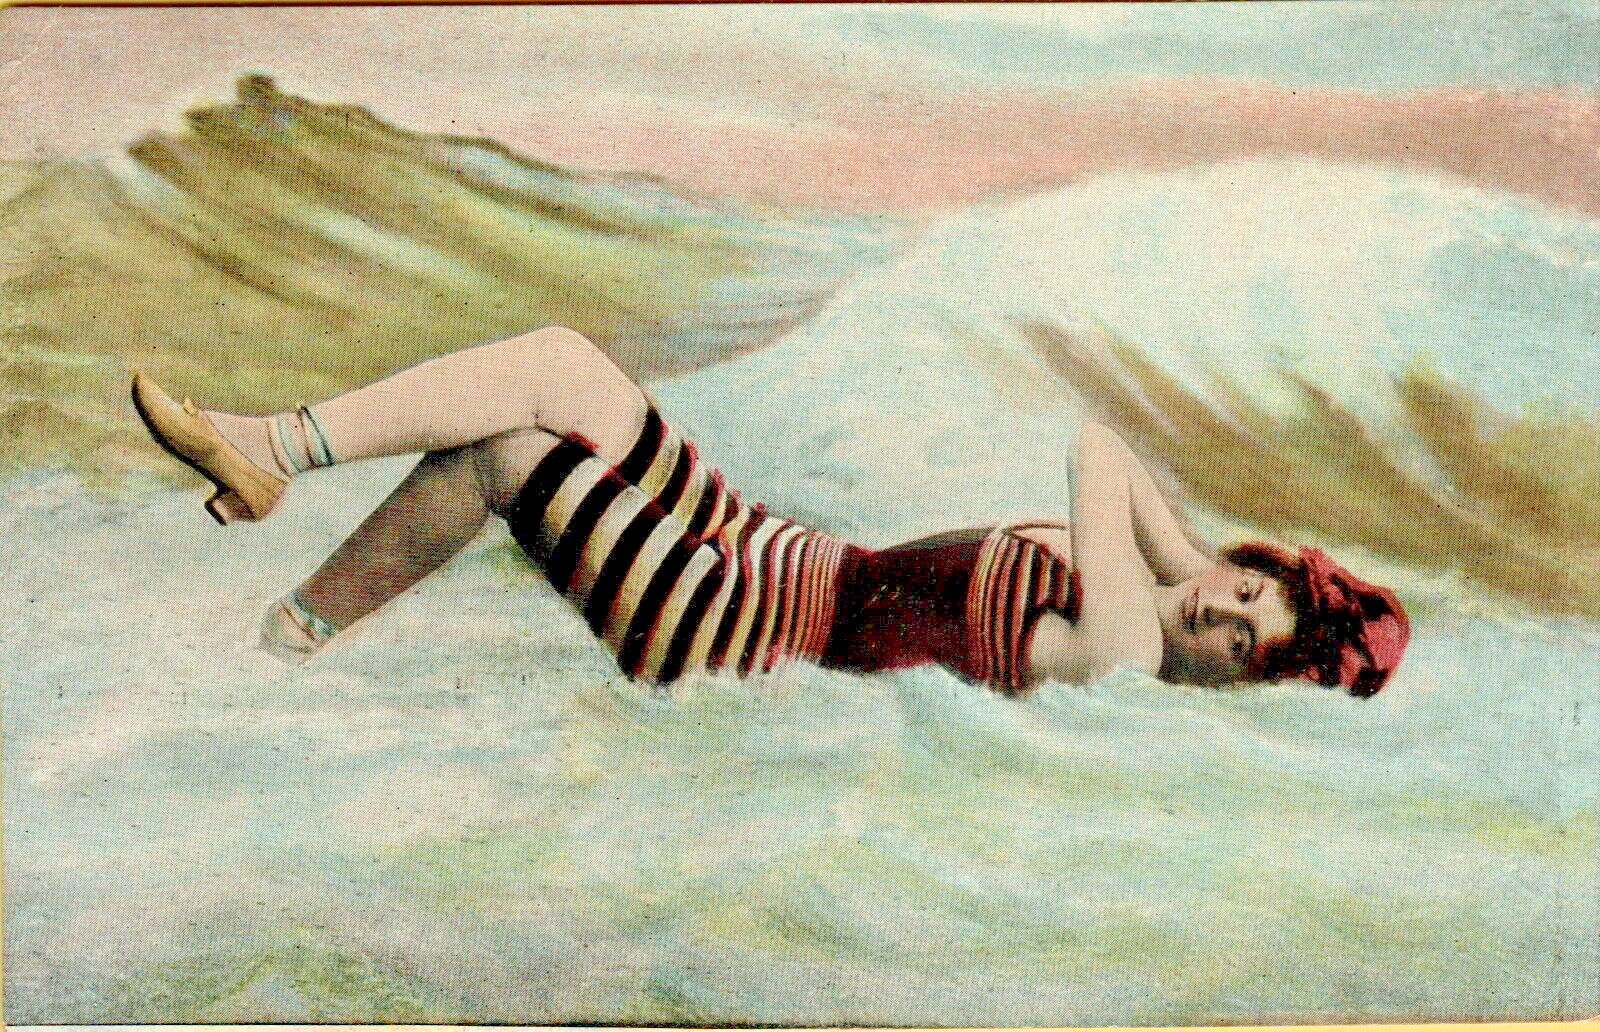 Antique Postcard 1909 Bathing Beauty Laying in Ocean with Heels On Posted